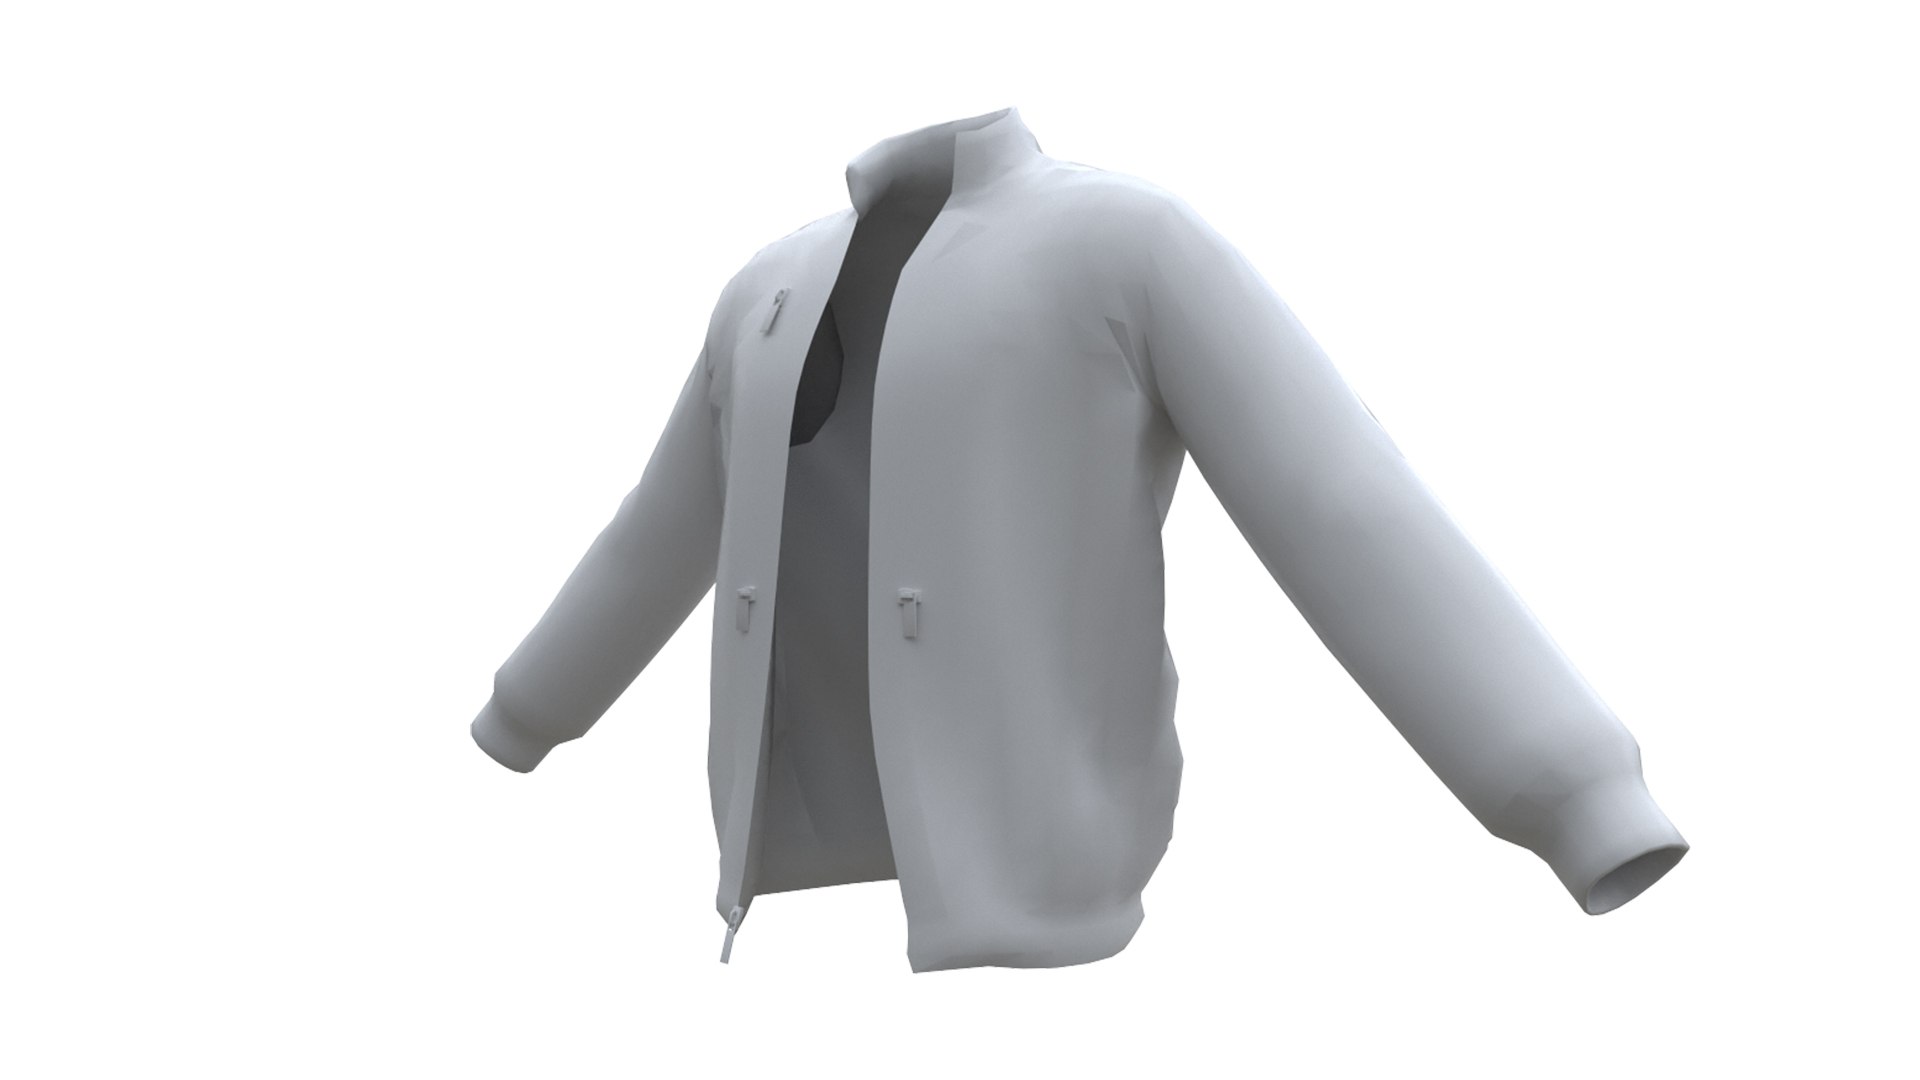 Safety Bomber Jacket Low-poly 3D model - TurboSquid 1859598